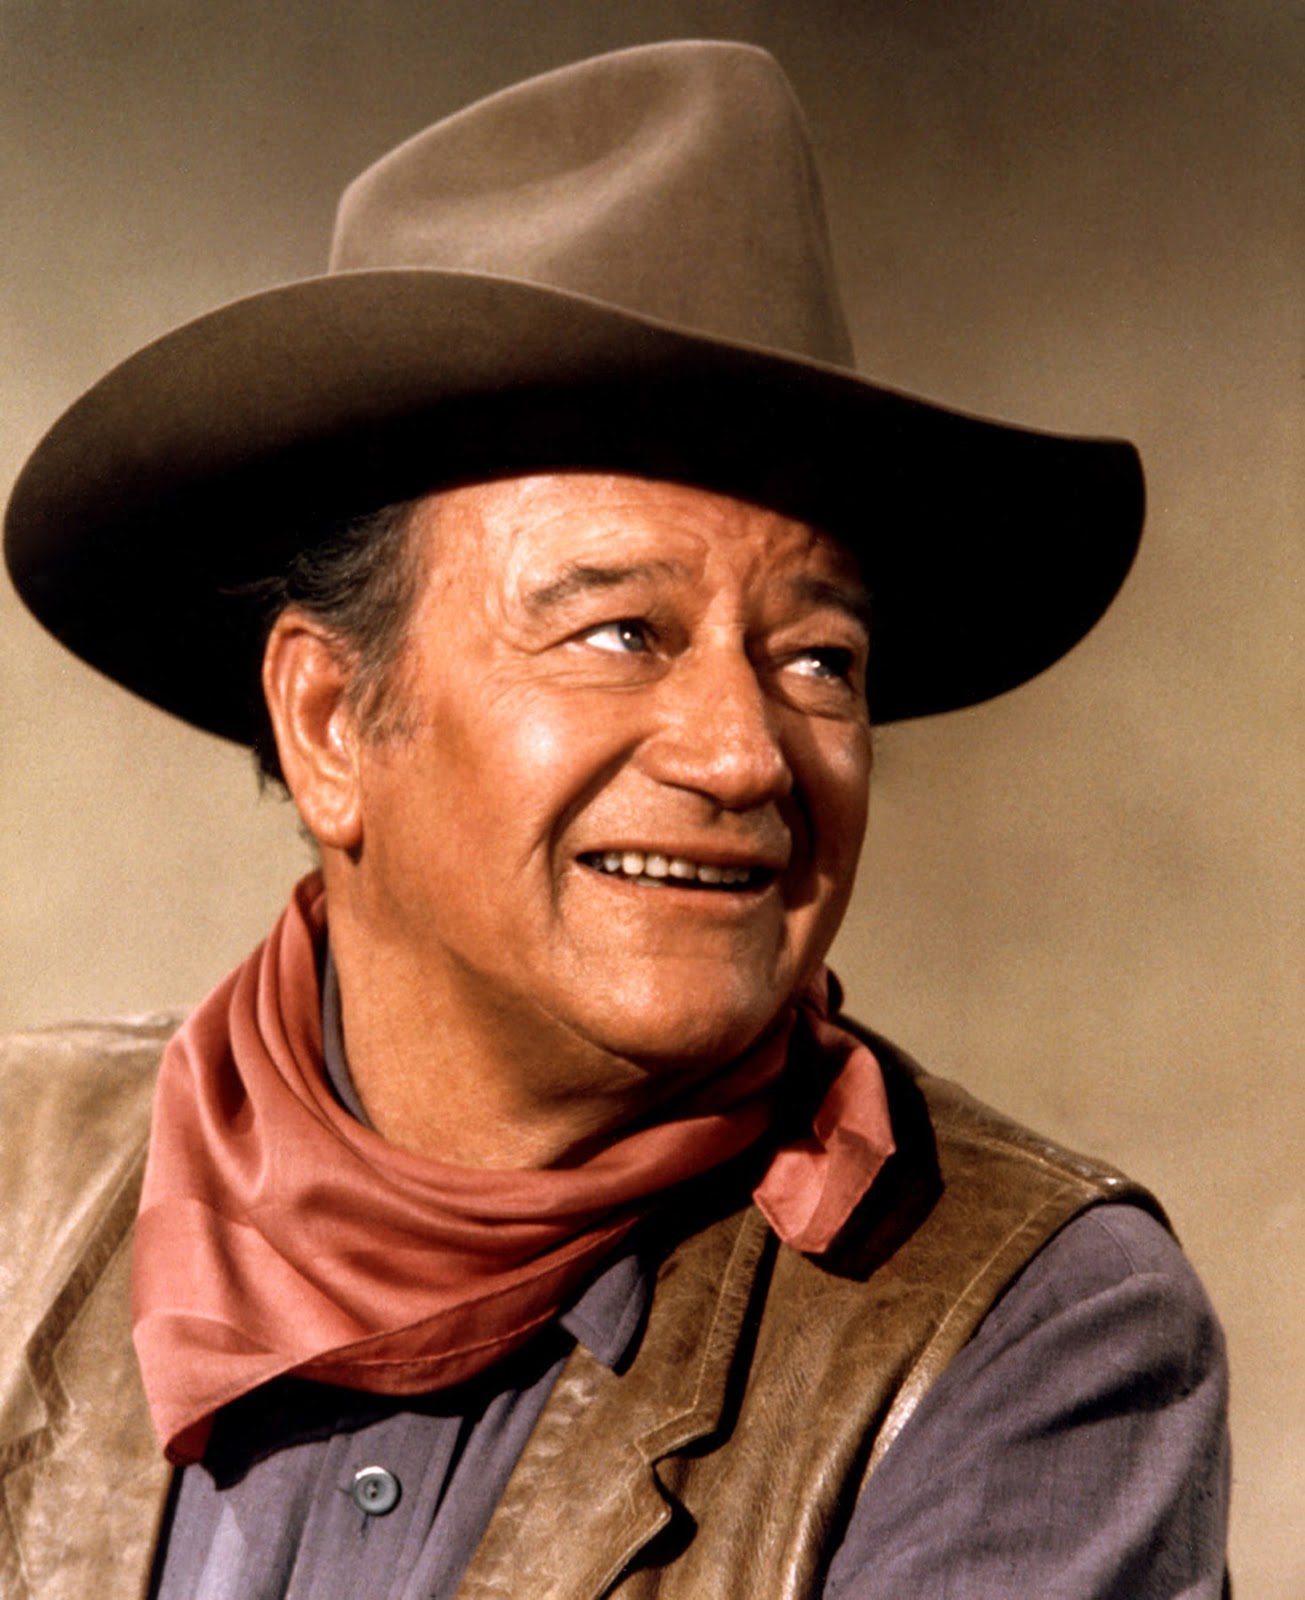 Chatter Busy: John Wayne Quotes
